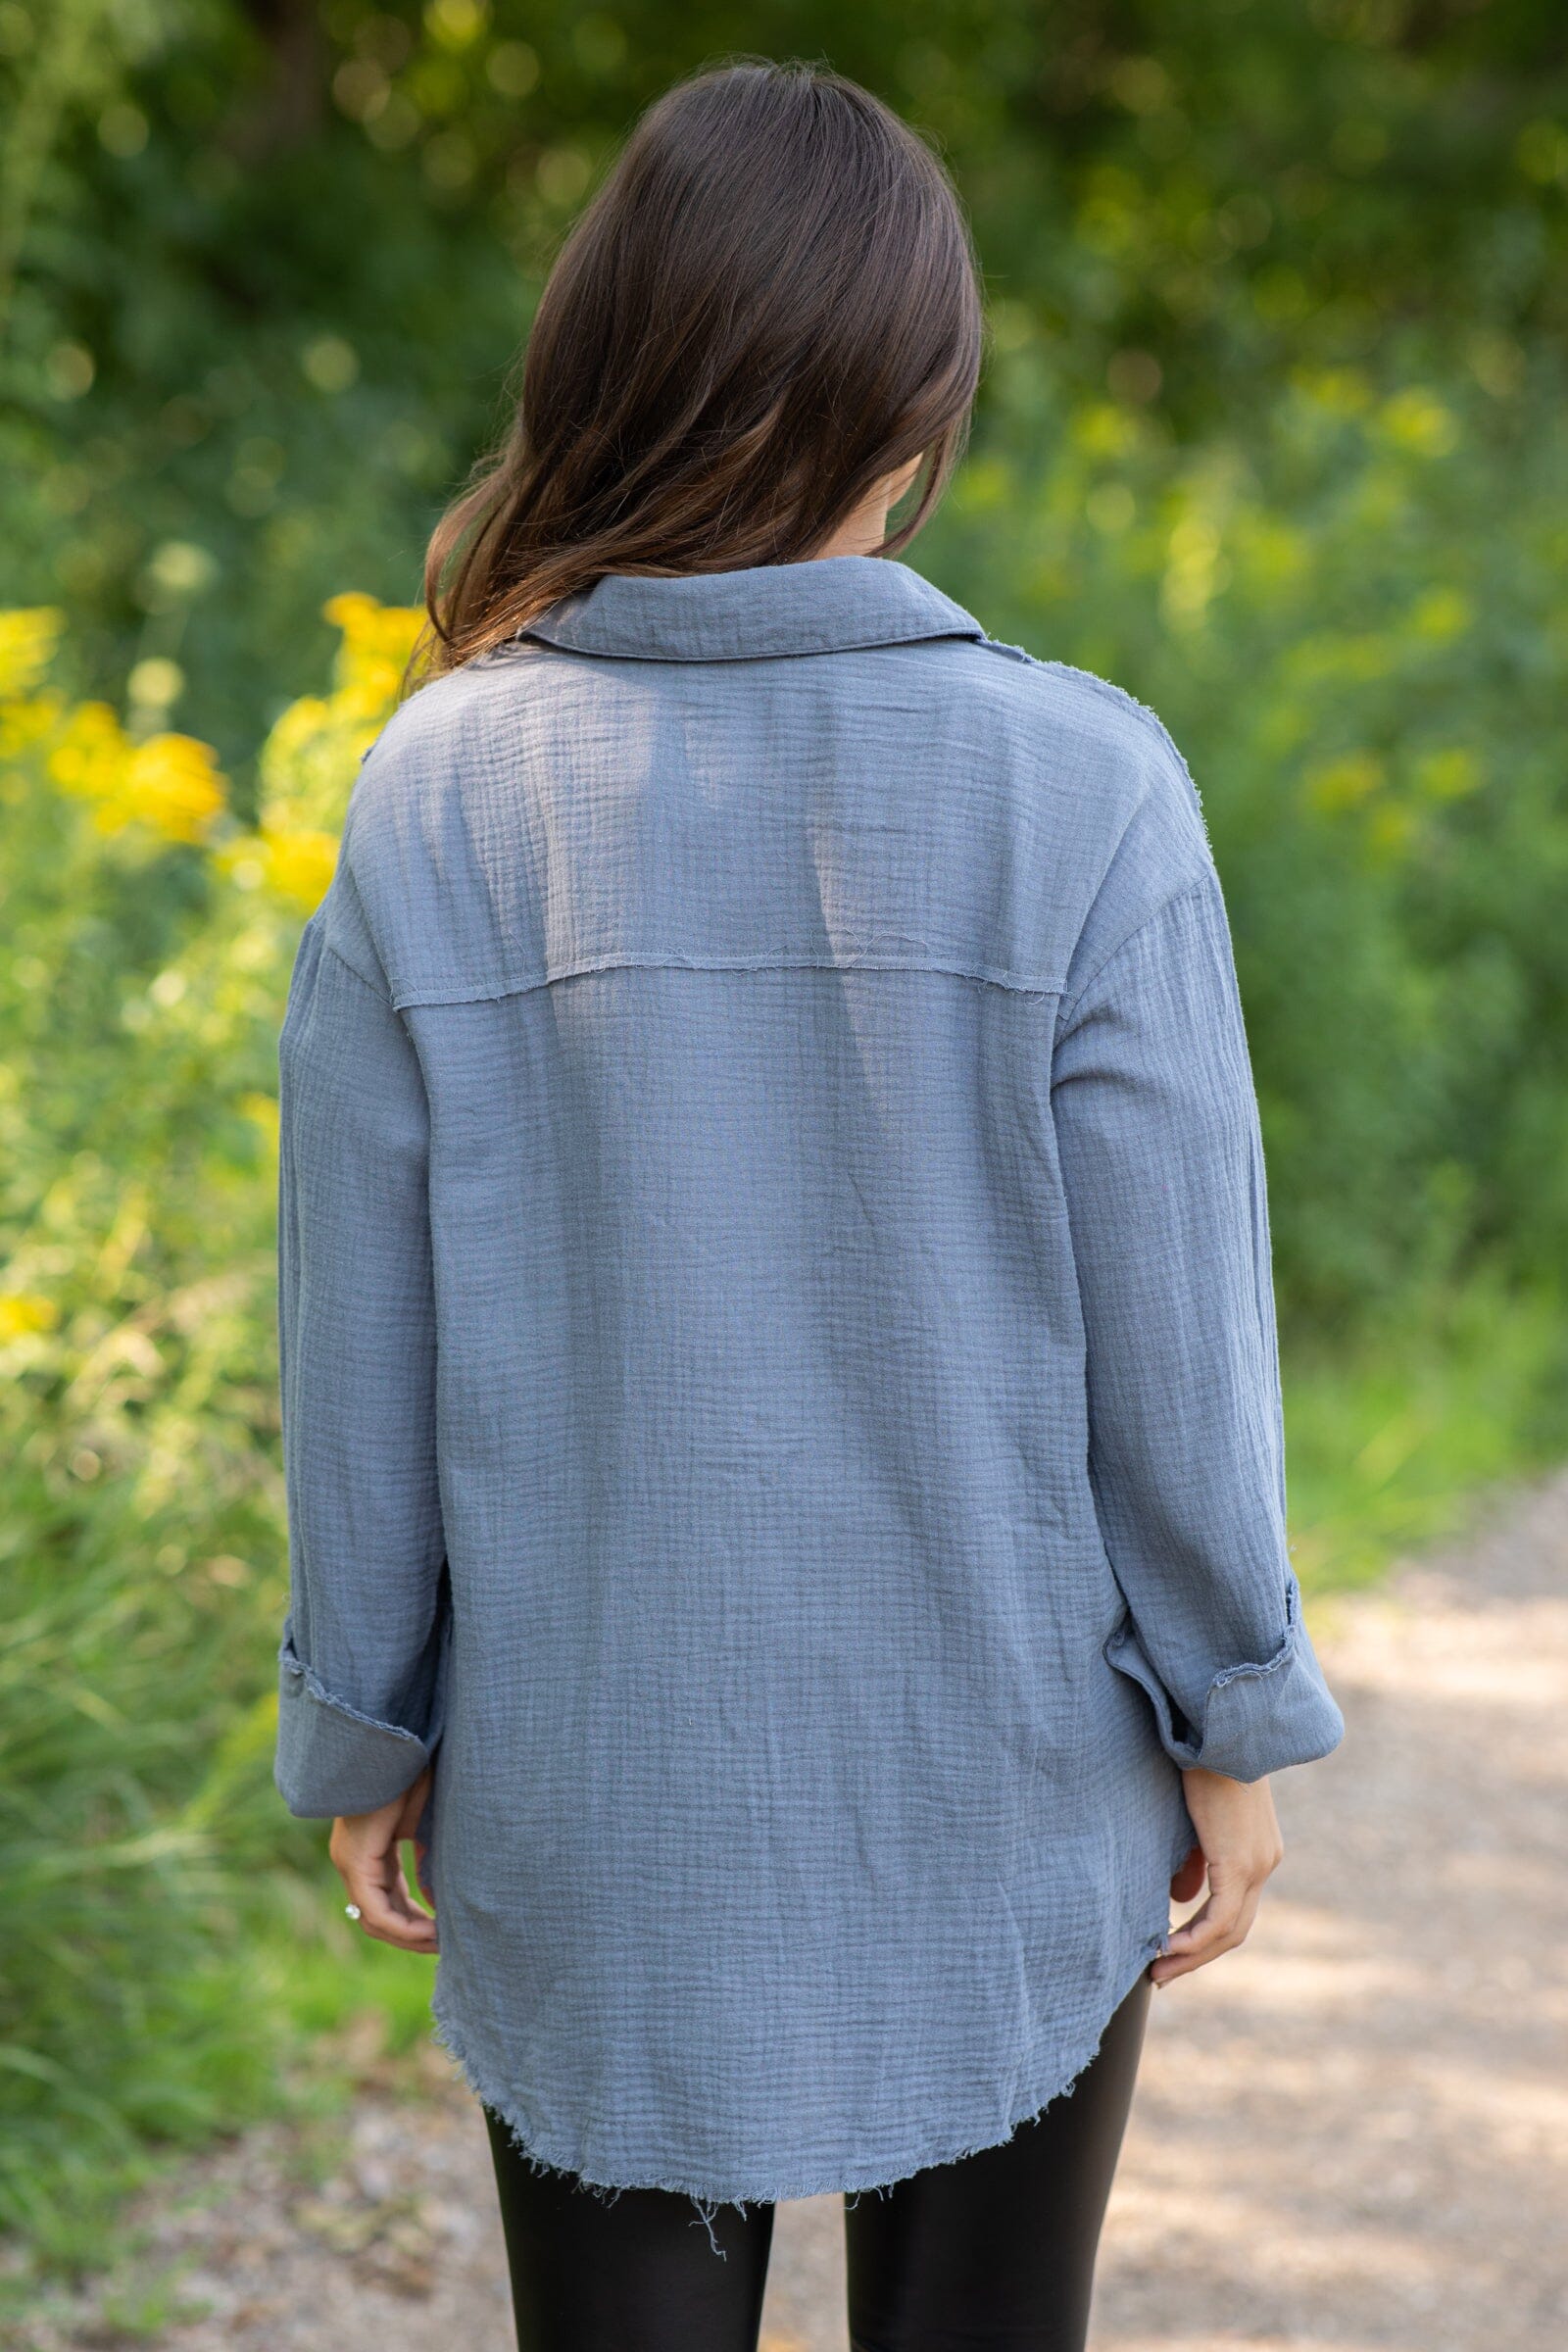 Slate Blue Gauze Textured Button Up Top - Filly Flair